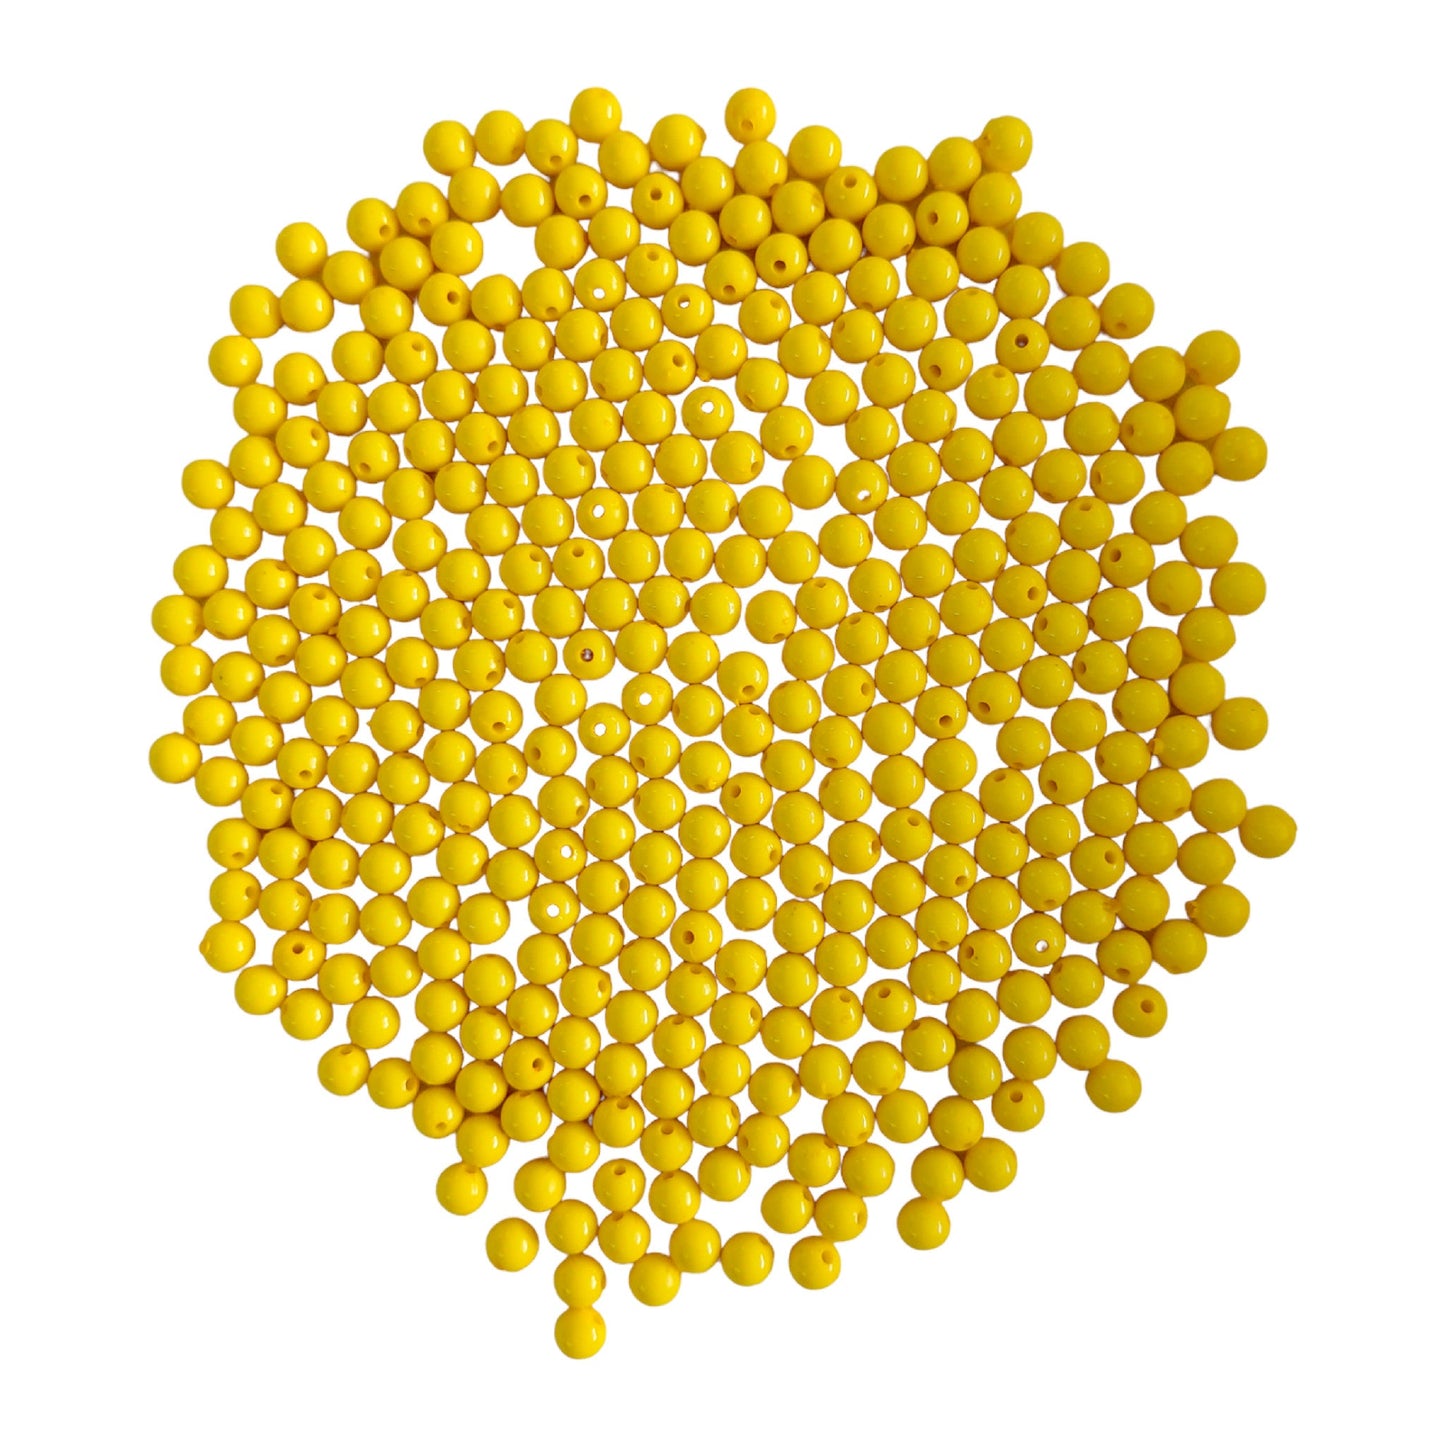 Indian Petals - Round ABS Colored Beads Ideal for Jewelry designing Craft or Decor Round ABS Colored Beads Ideal for Jewelry designing Craft or Decor - 6mm / Yellow / 100 Grams